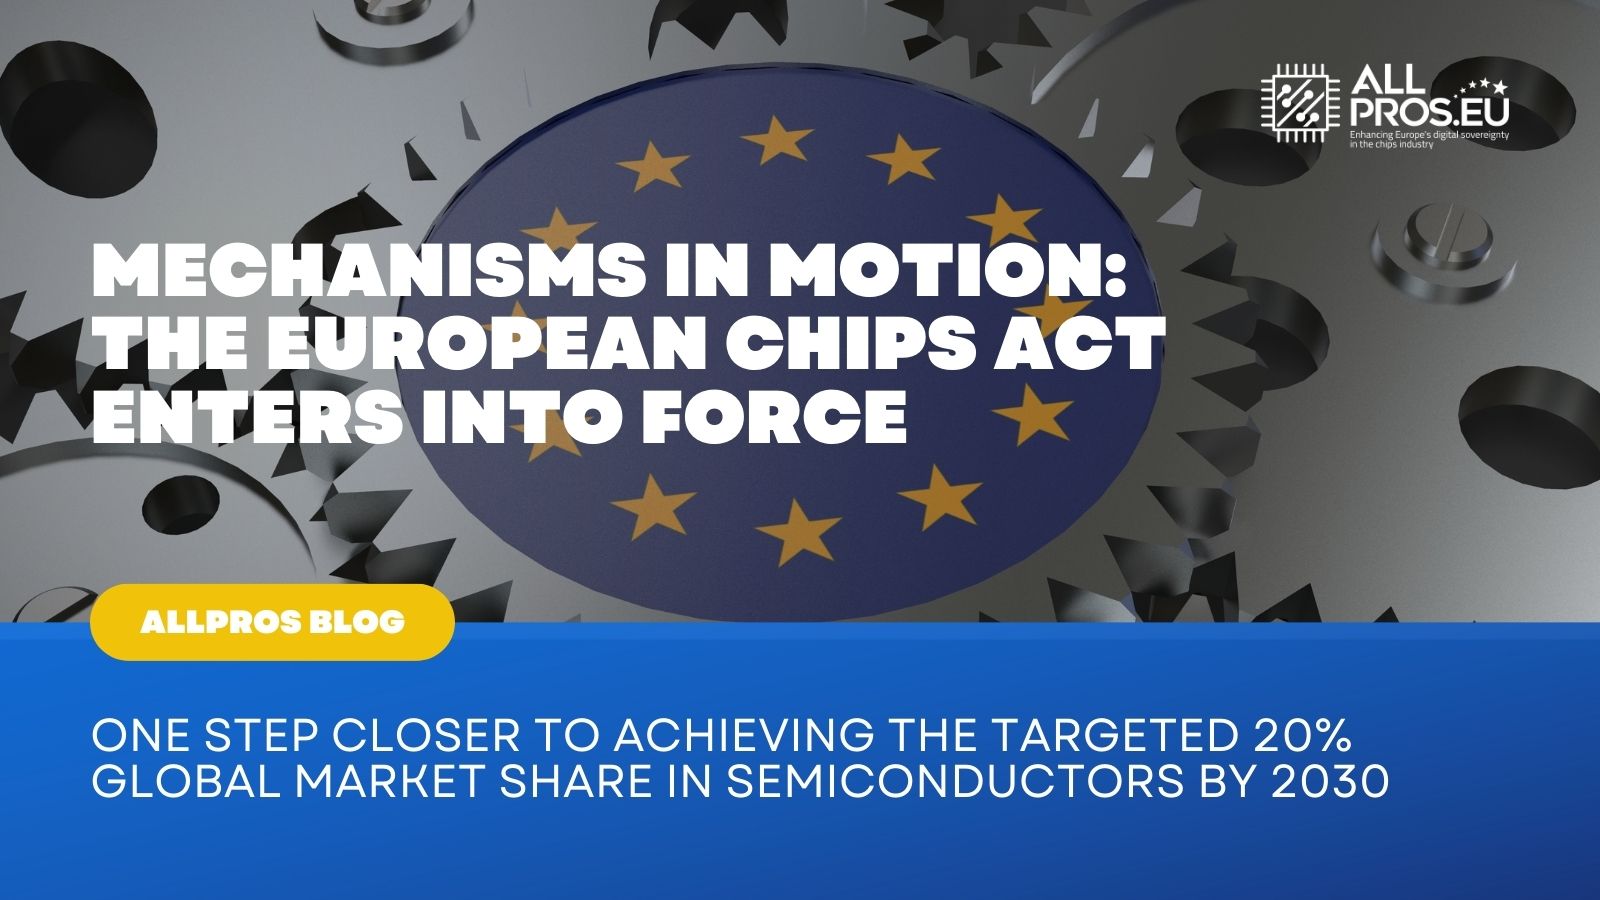 Mechanisms in motion: the European Chips Act enters into force